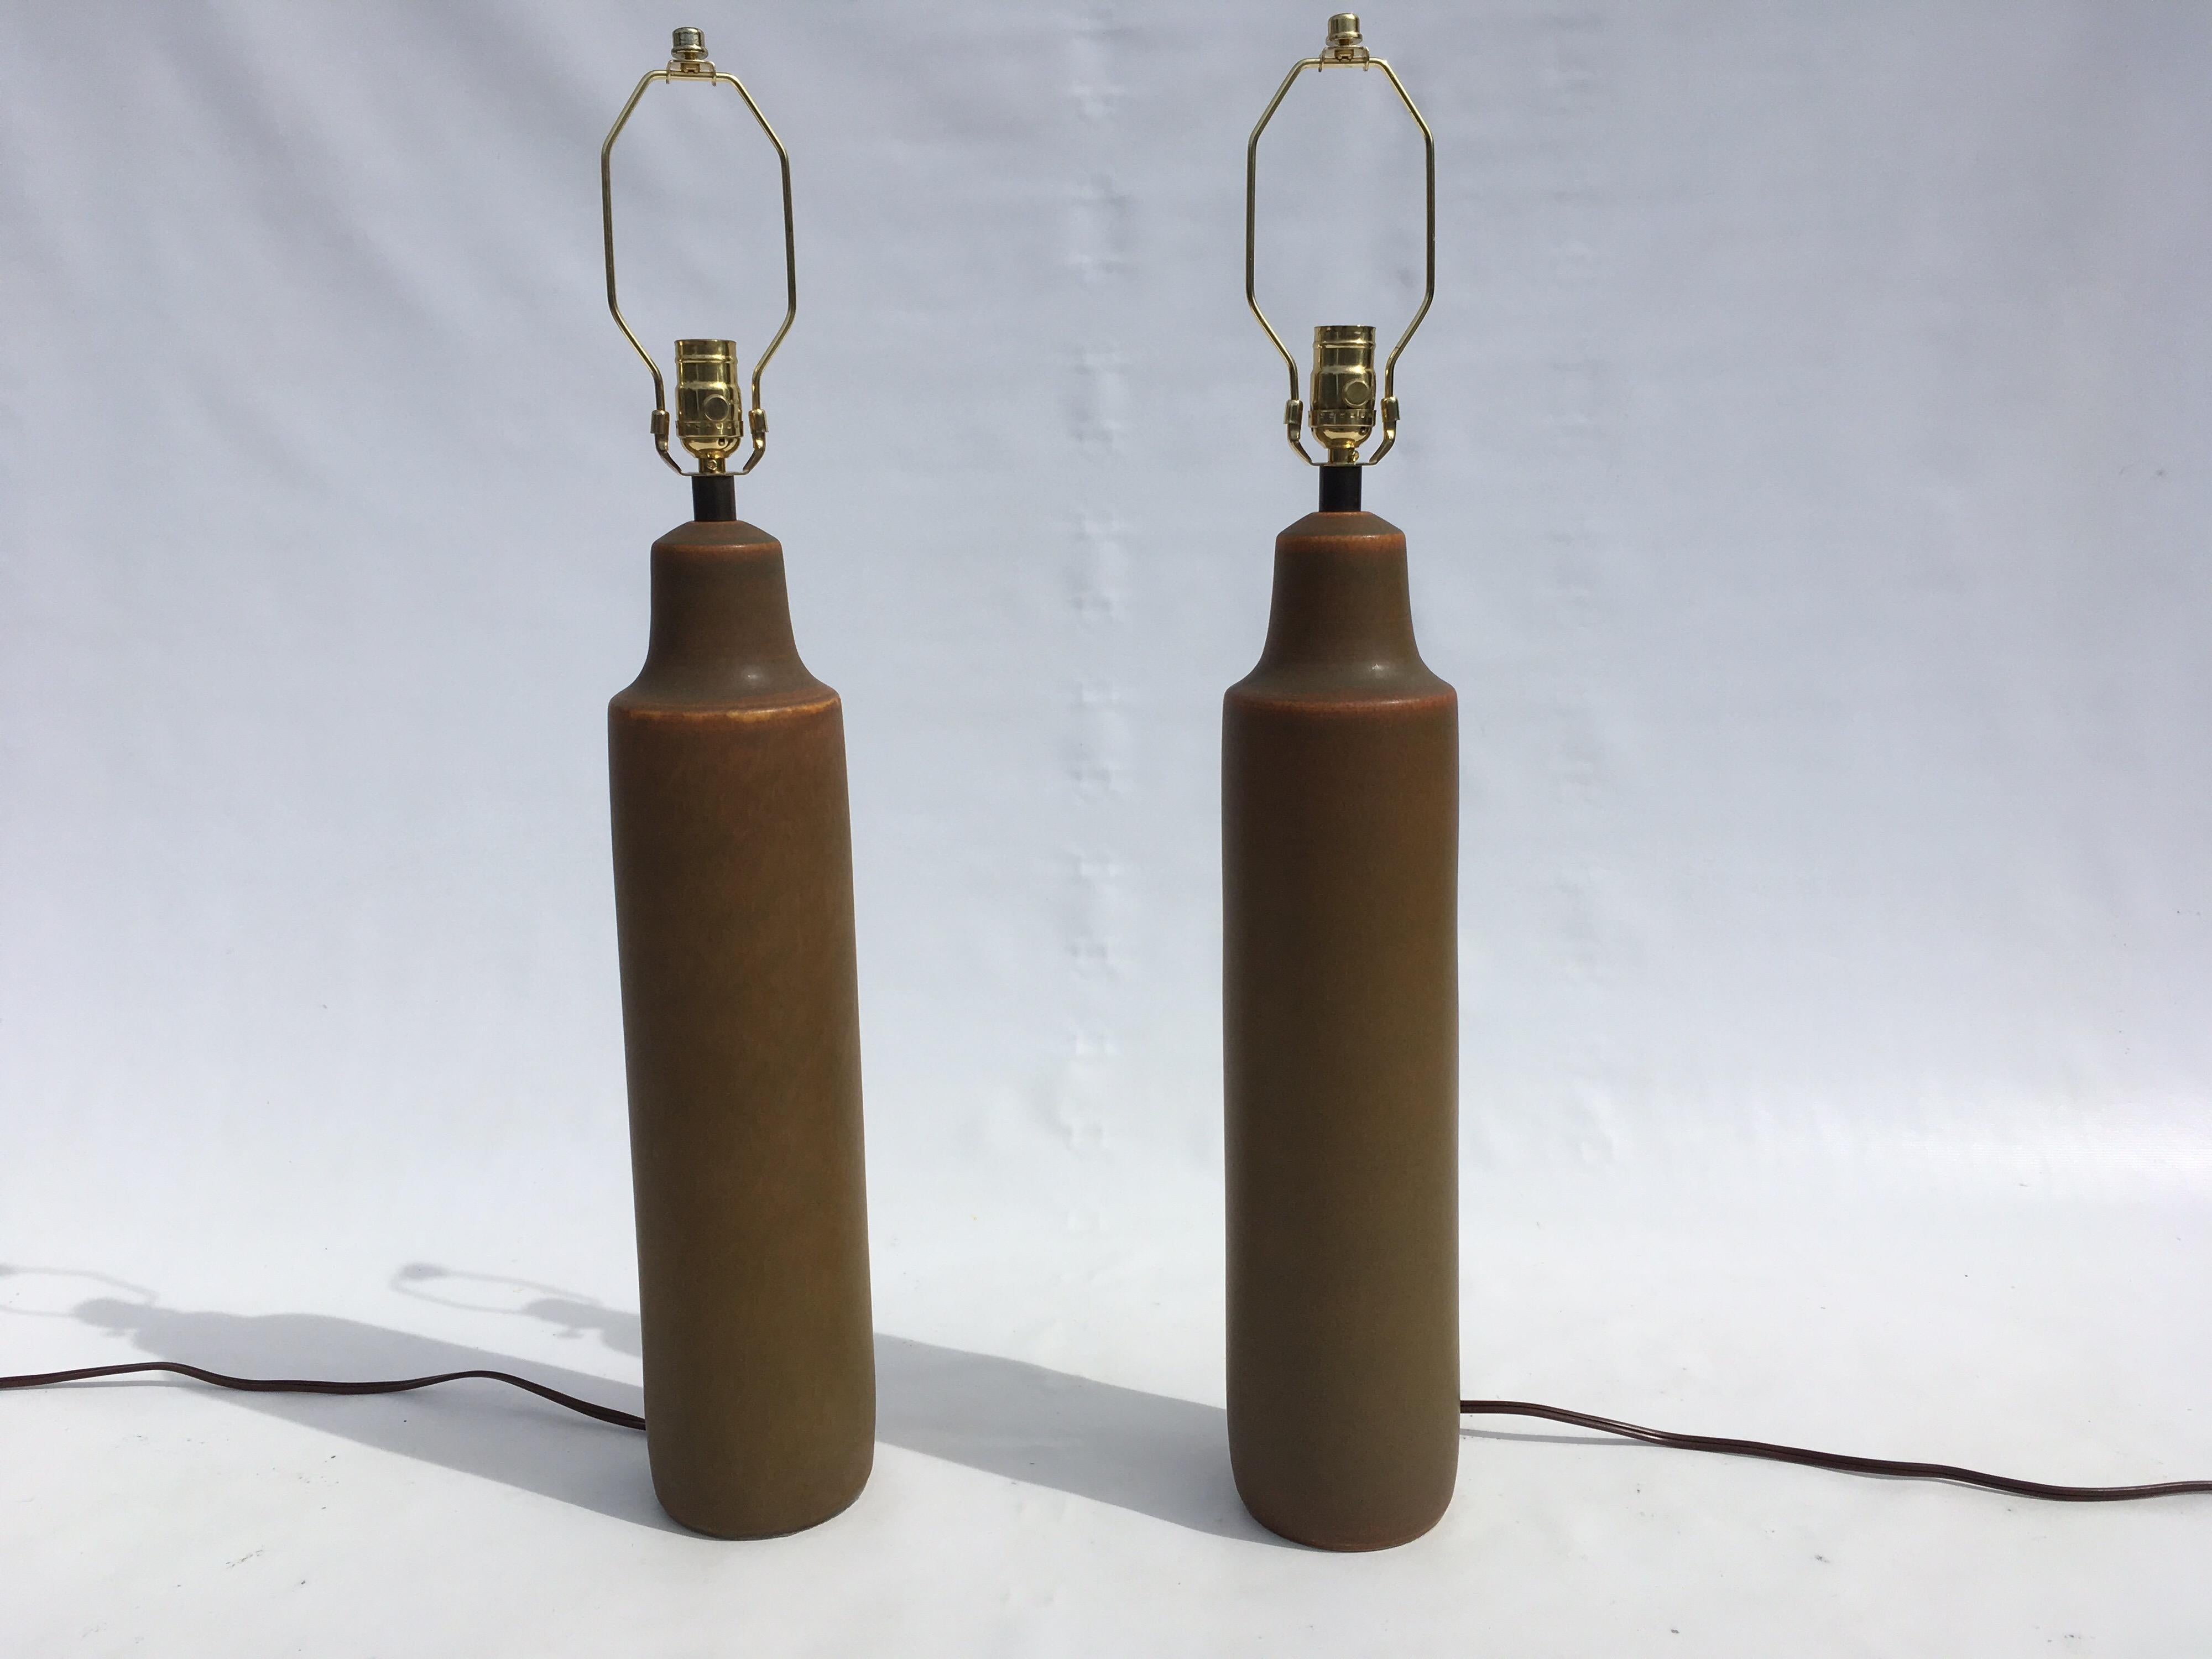 Stunning large original midcentury ceramic lamps, olive green color with different shades of orange and yellow. Please see all pictures. Shades are fairly new.